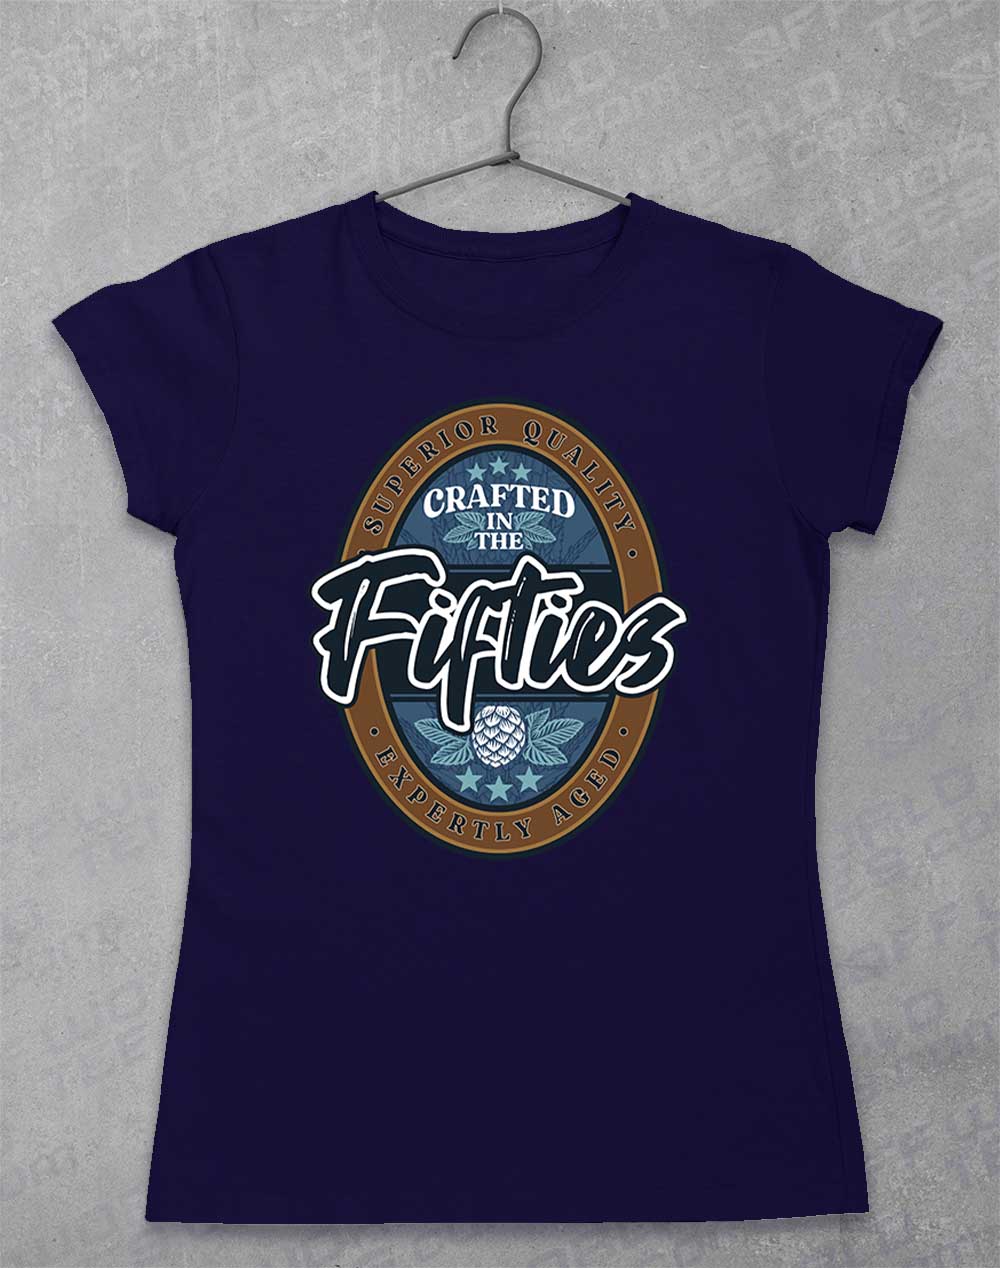 Crafted in the Fifties Women's T-Shirt